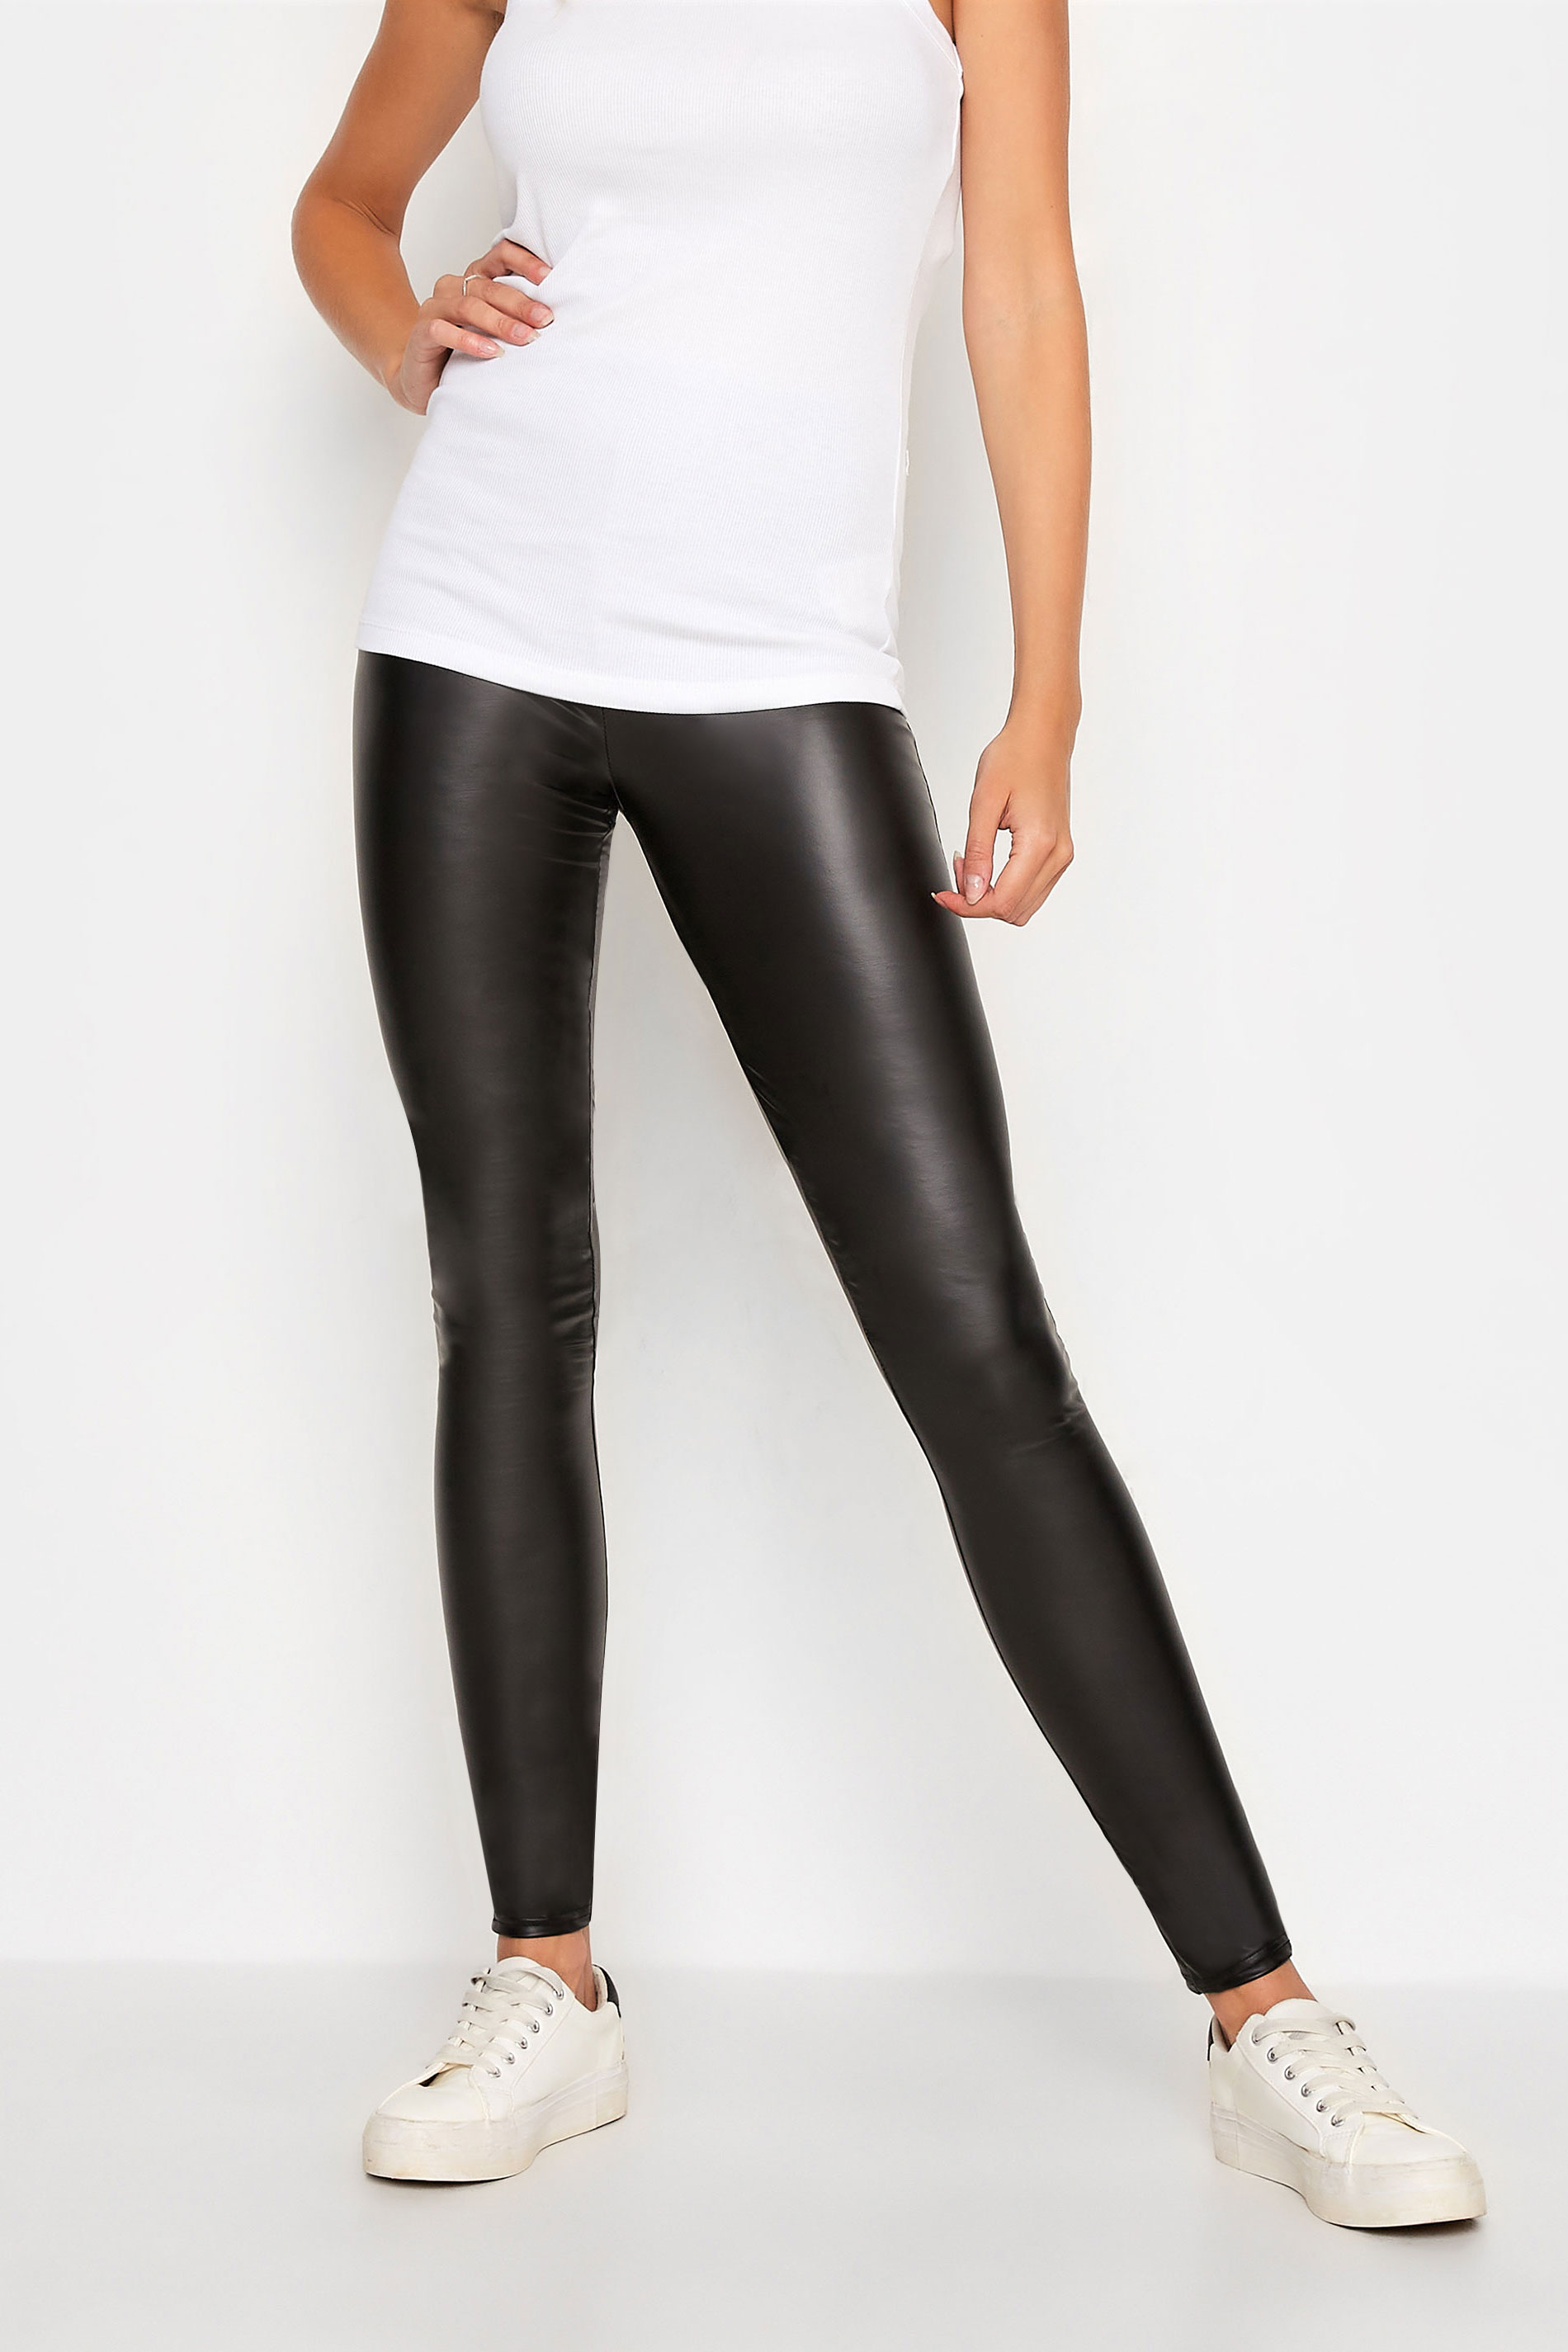 LTS Tall Womens Black Stretch Faux Leather Leggings | Long Tall Sally  1